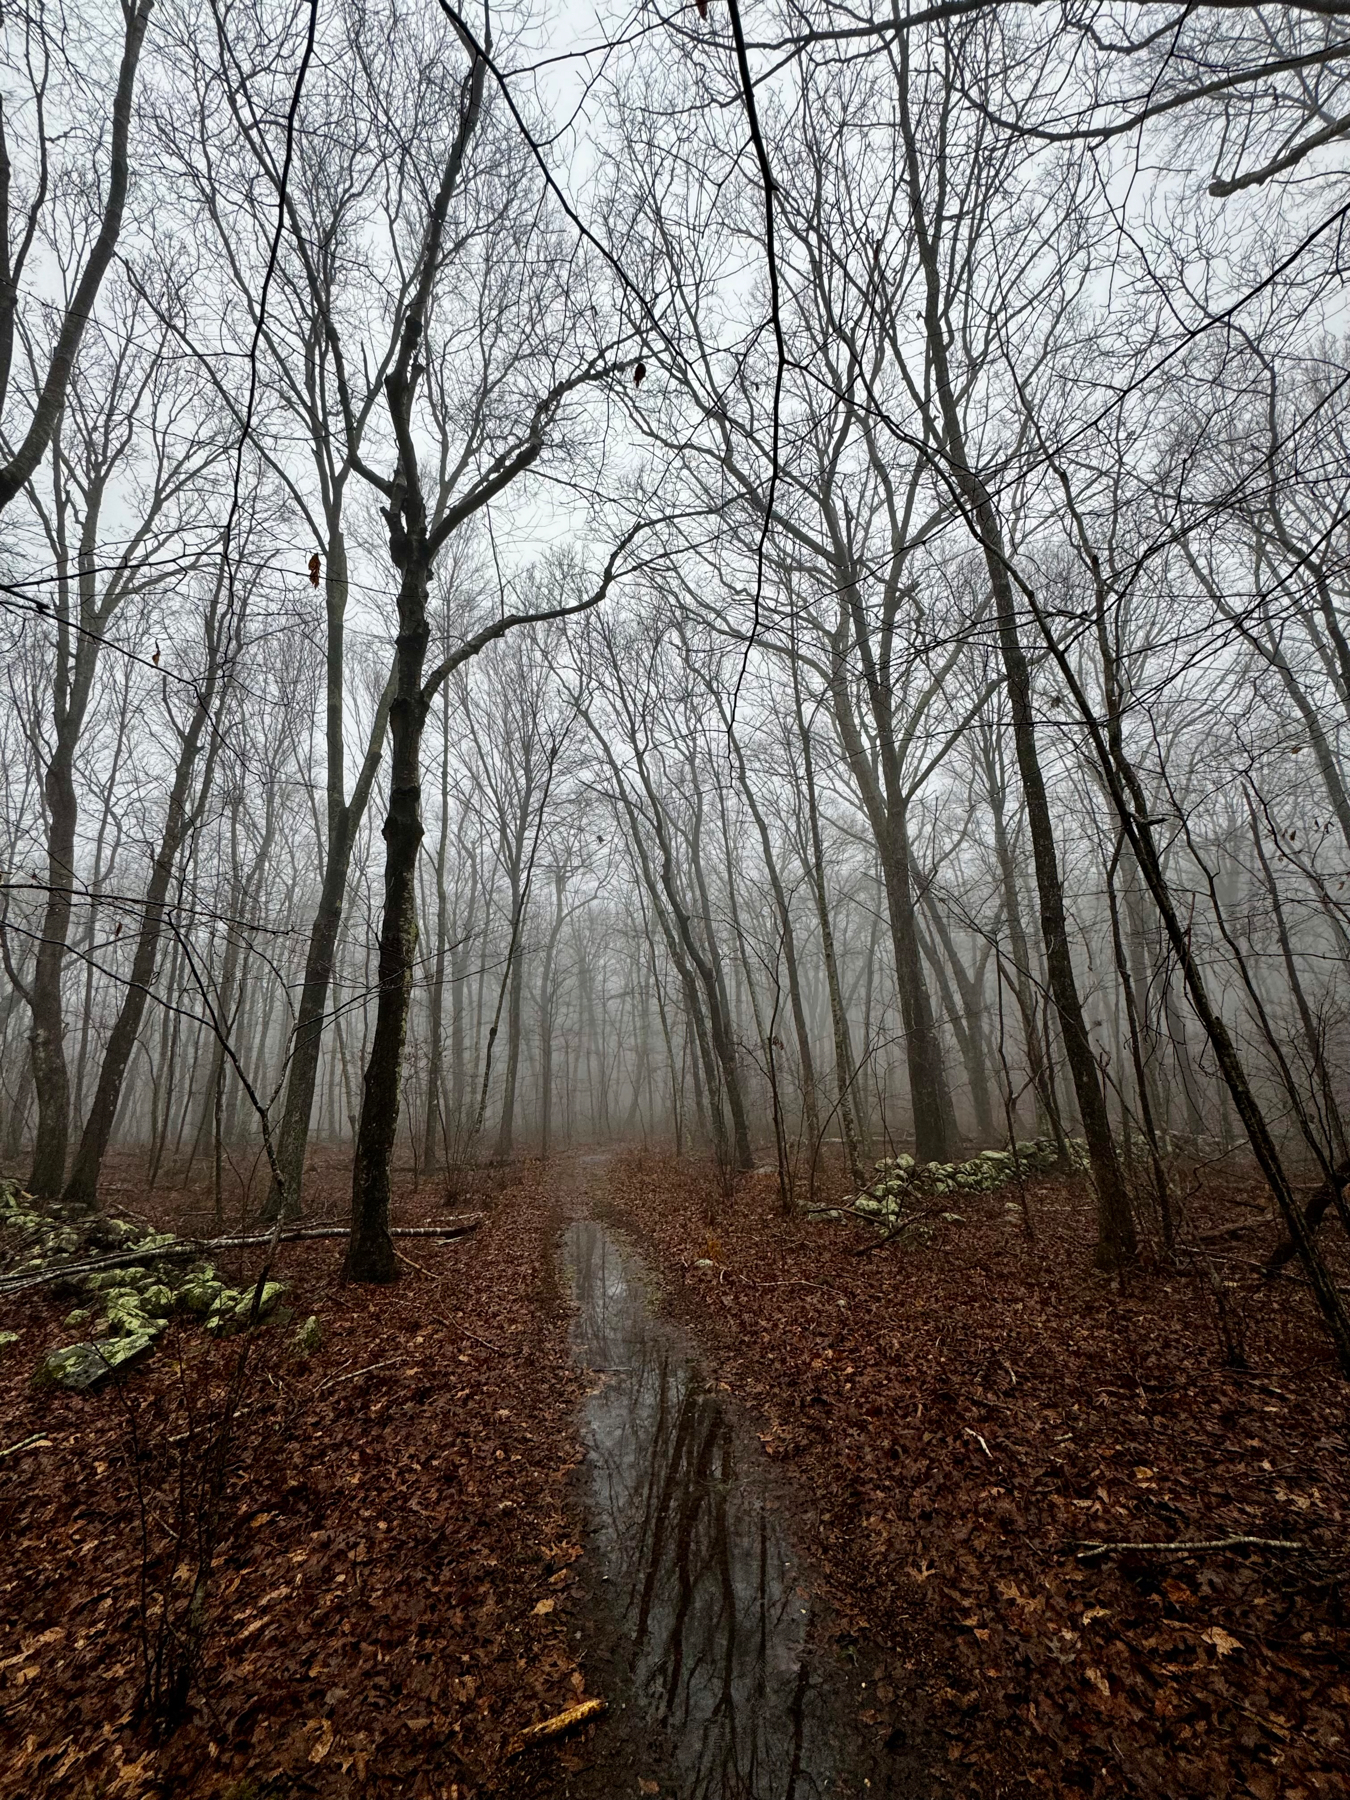 Foggy and cold winter morning with leafless trees and a waterlogged trail in the middle